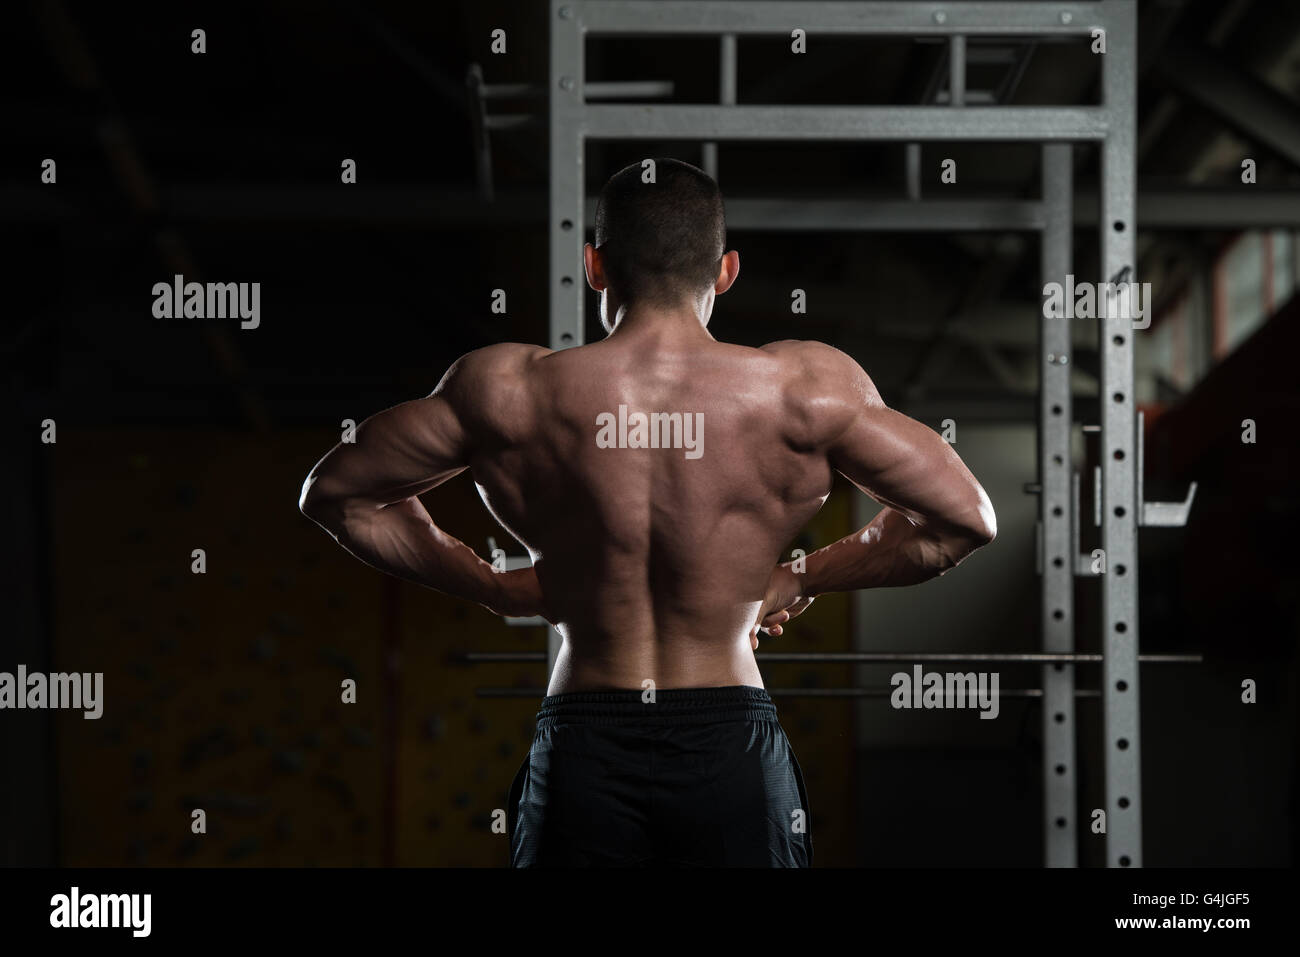 Bodybuilder pperfroming a back double biceps pose in gym stock photo